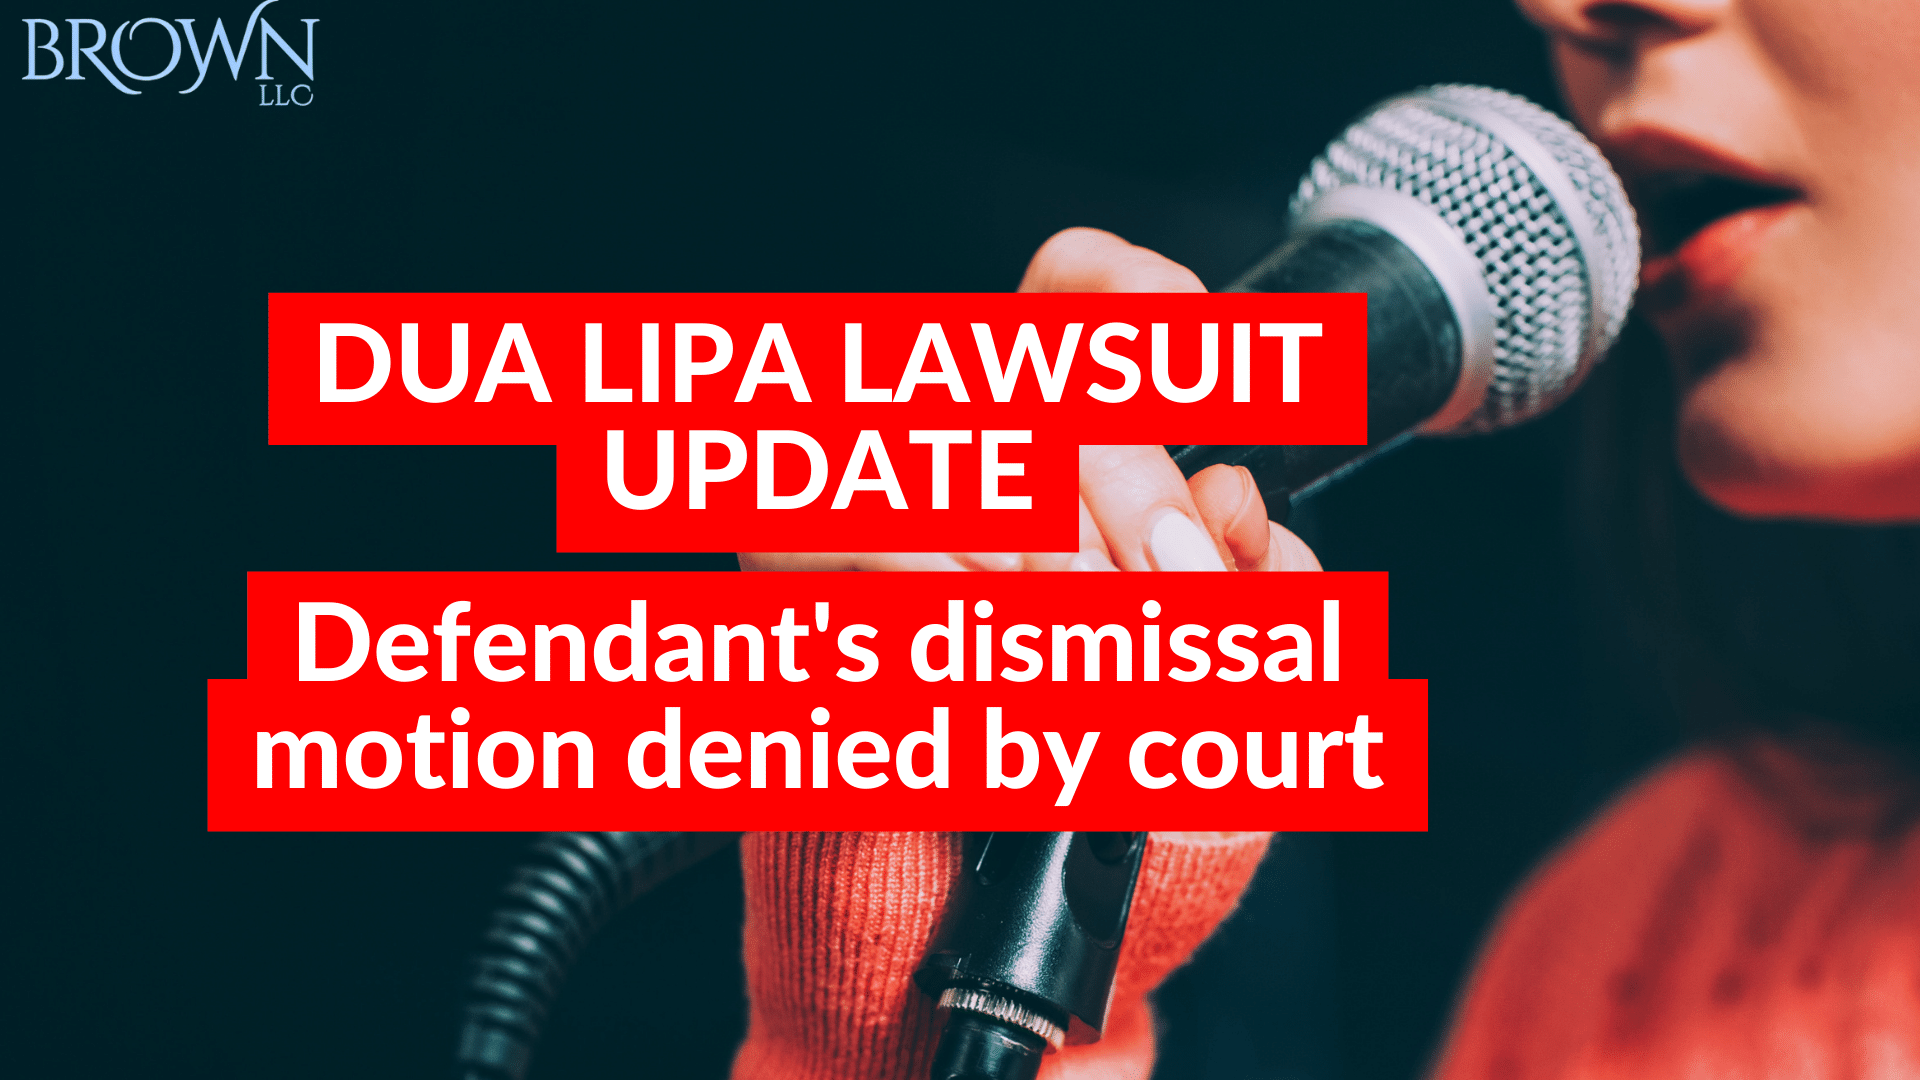 Iconic Songwriters’ Copyright Infringement Claims against Dua Lipa’s “Levitating” can Proceed to Discovery